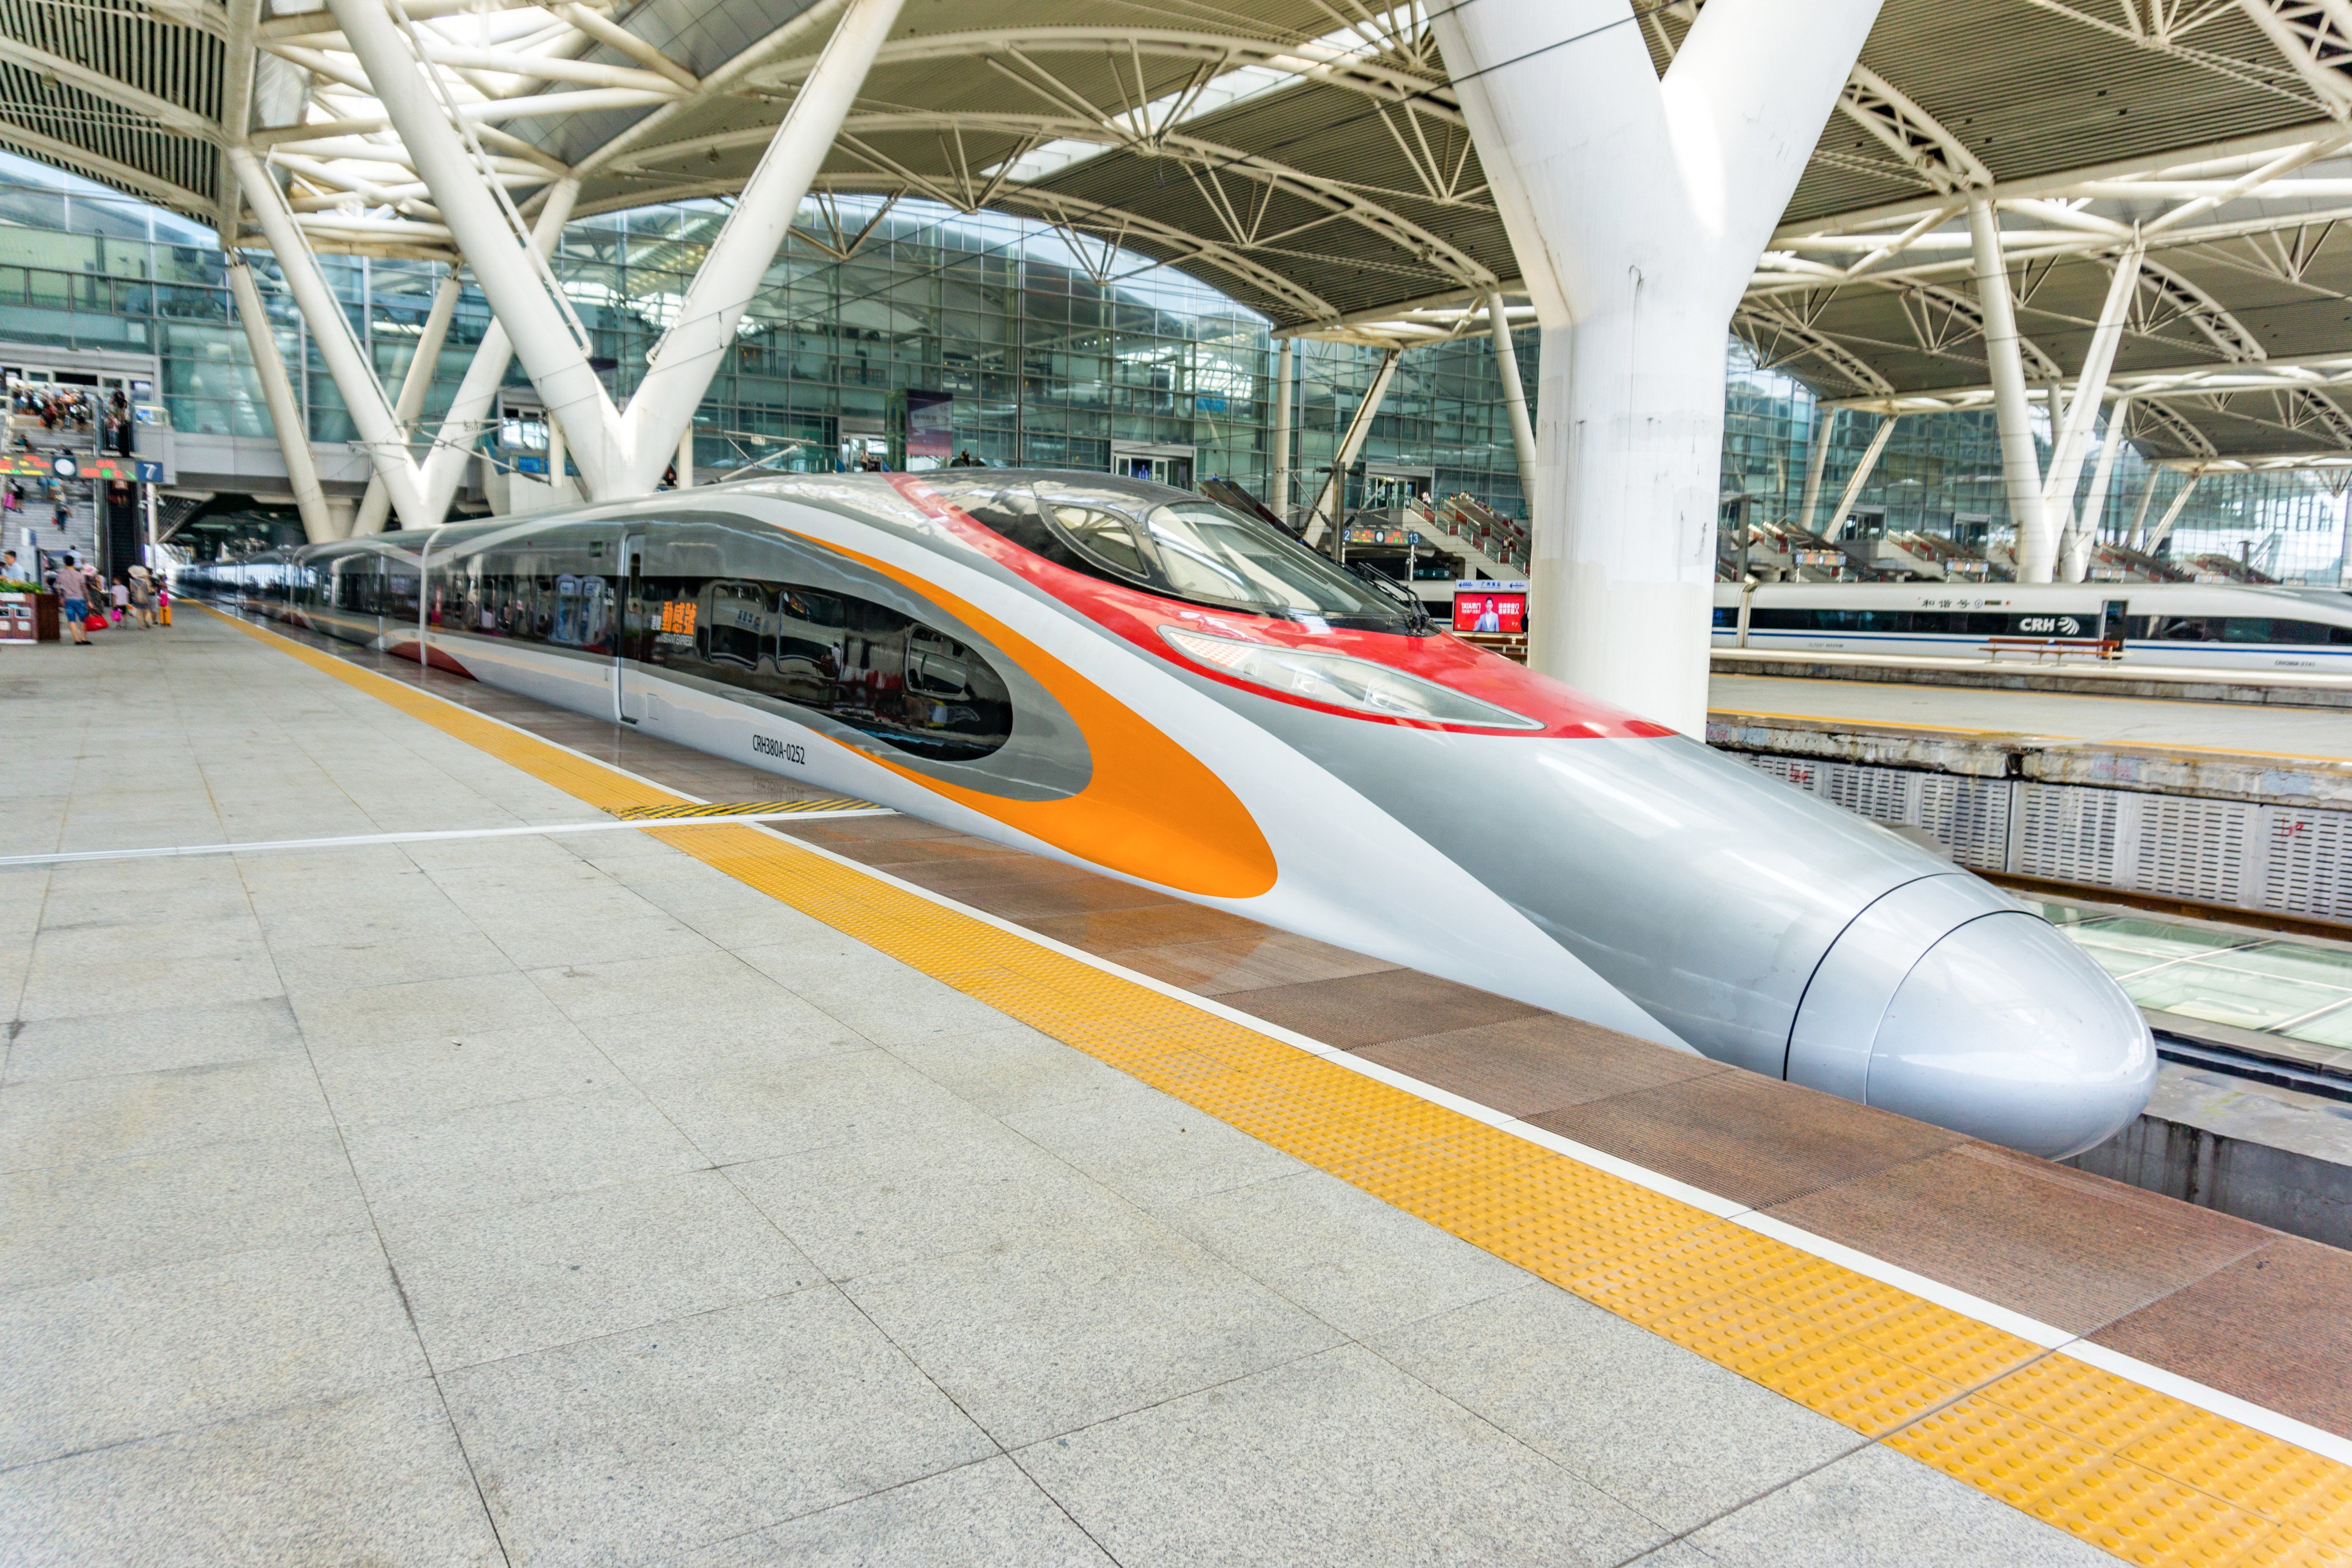 A Hong Kong-bound high-speed train stops at Guangzhou South Railway Station. A century ago the Japanese-built South Manchuria Railway, like the Guangzhou-Hong Kong railway, improved connectivity within China, but is viewed as an act of hostile foreign colonialism.